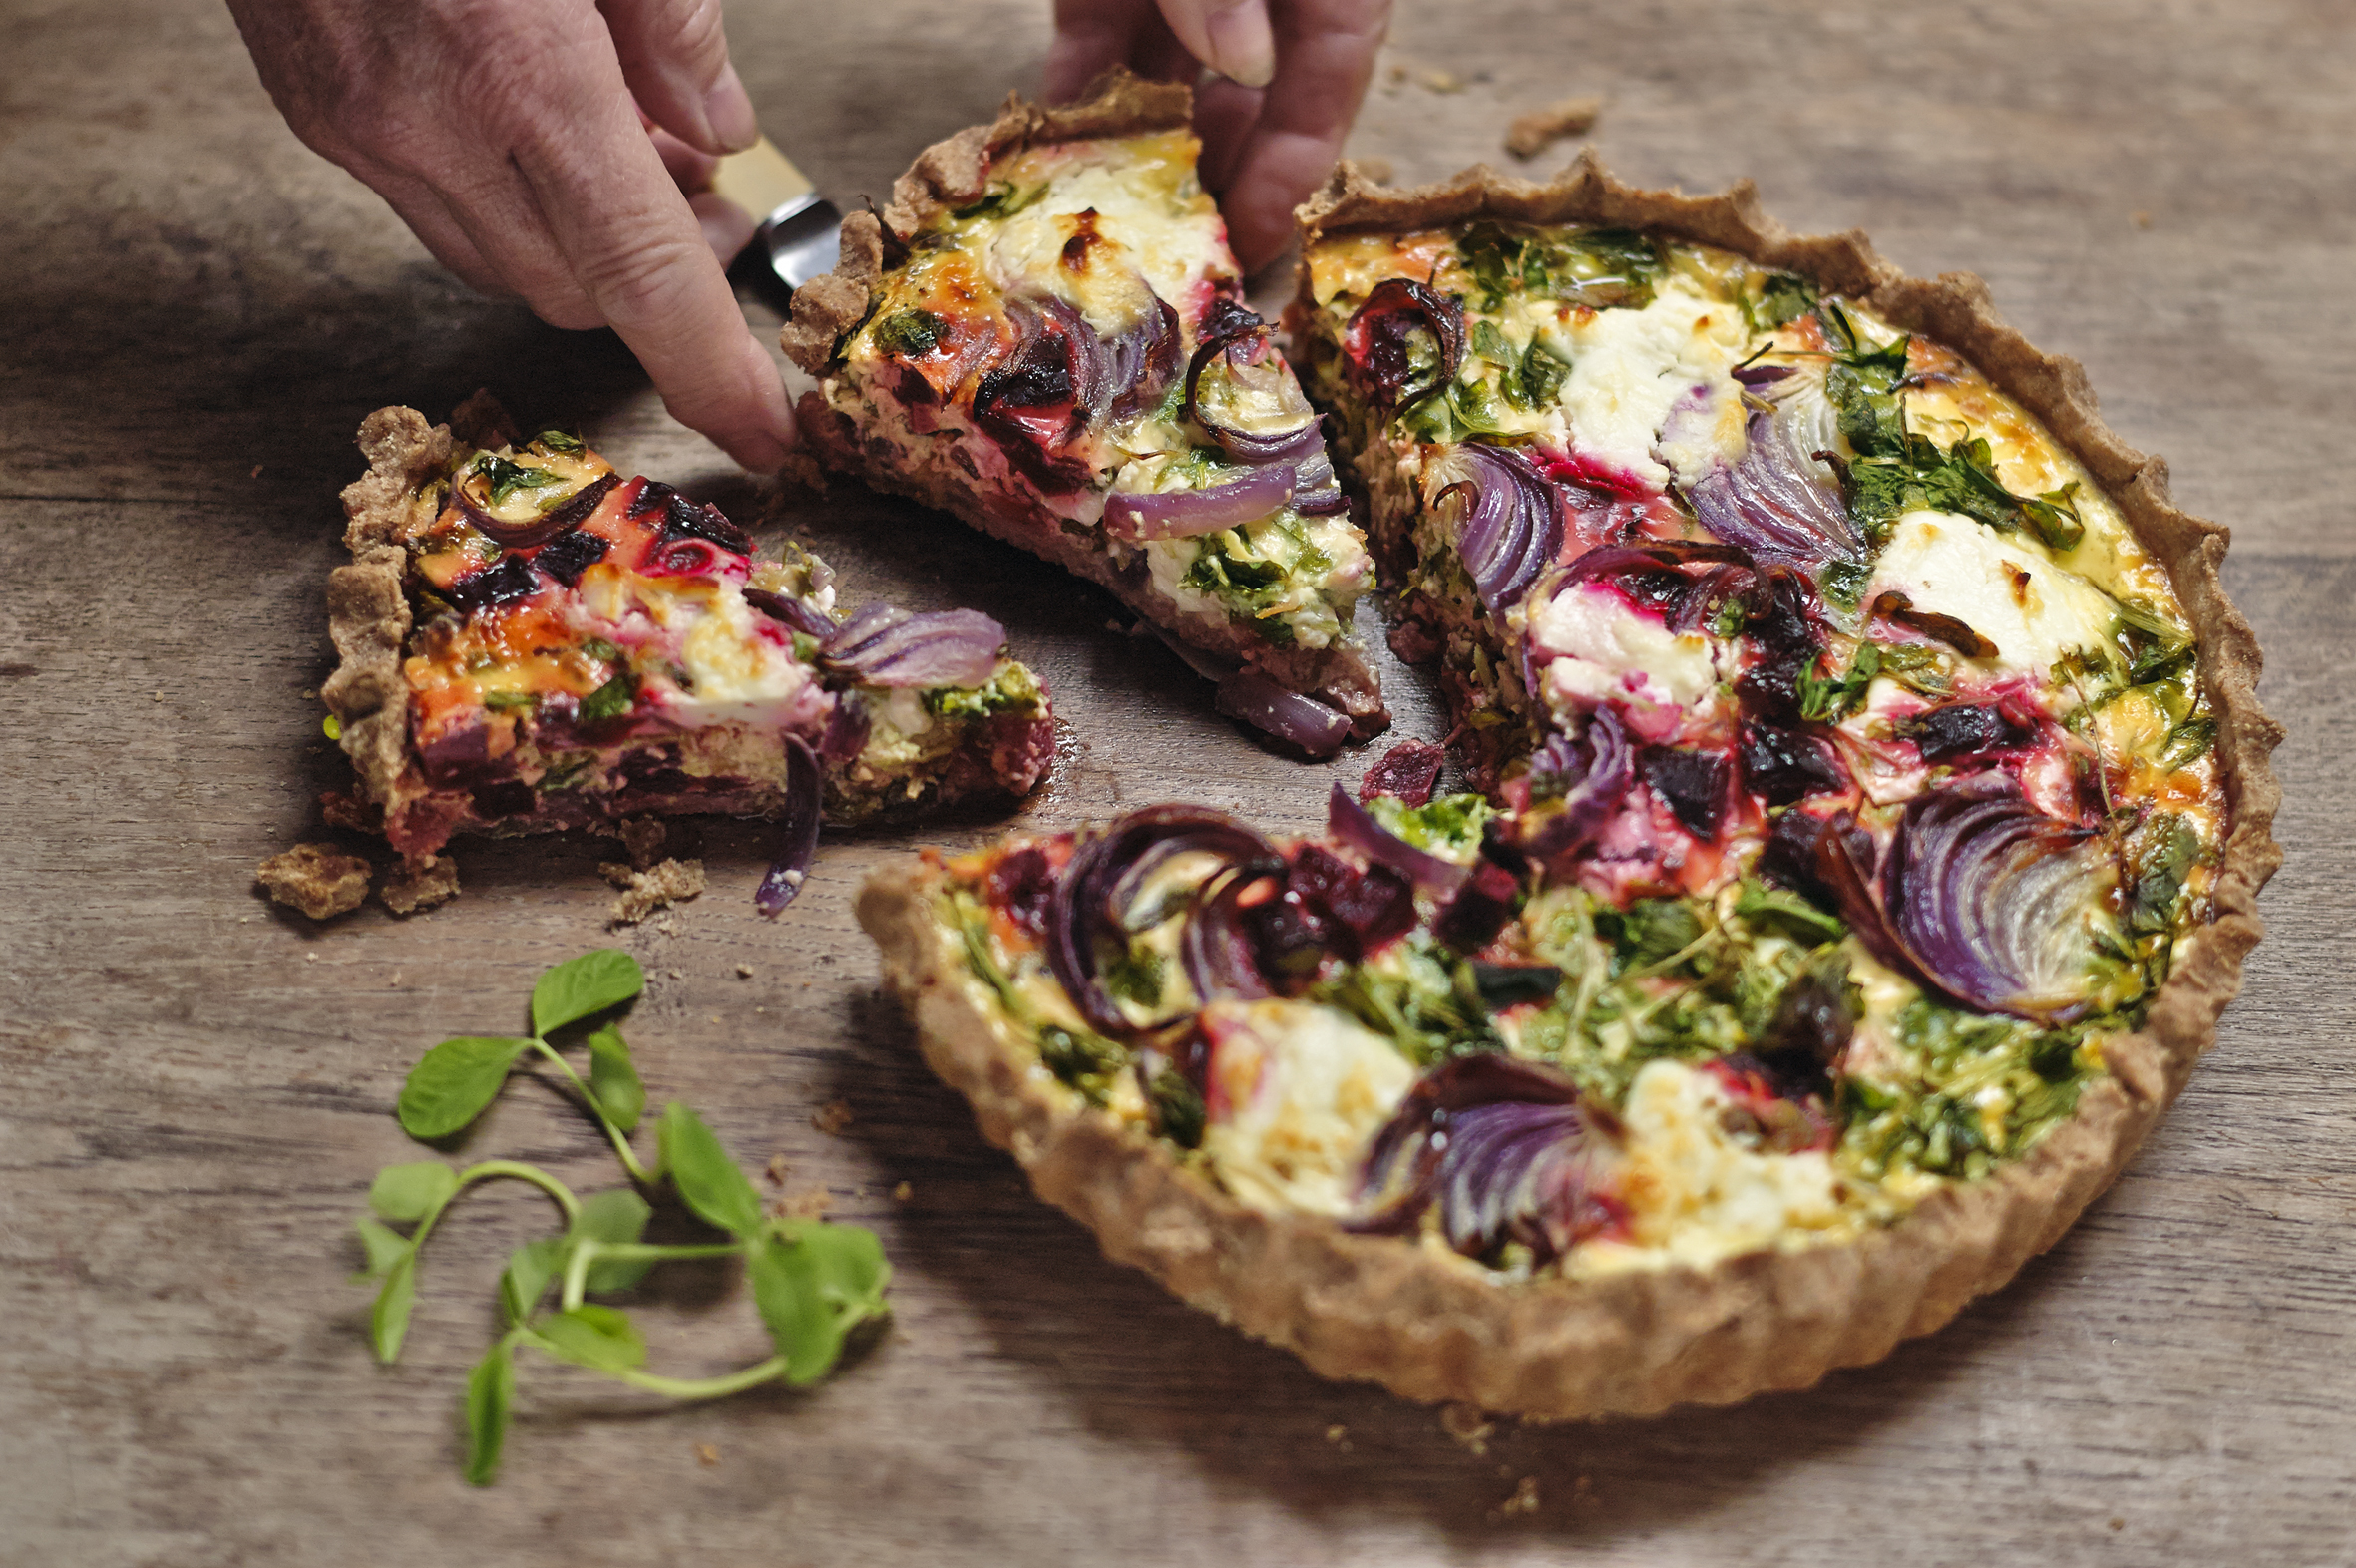 Pea Shoots, Beetroot and Goat's Cheese Quiche